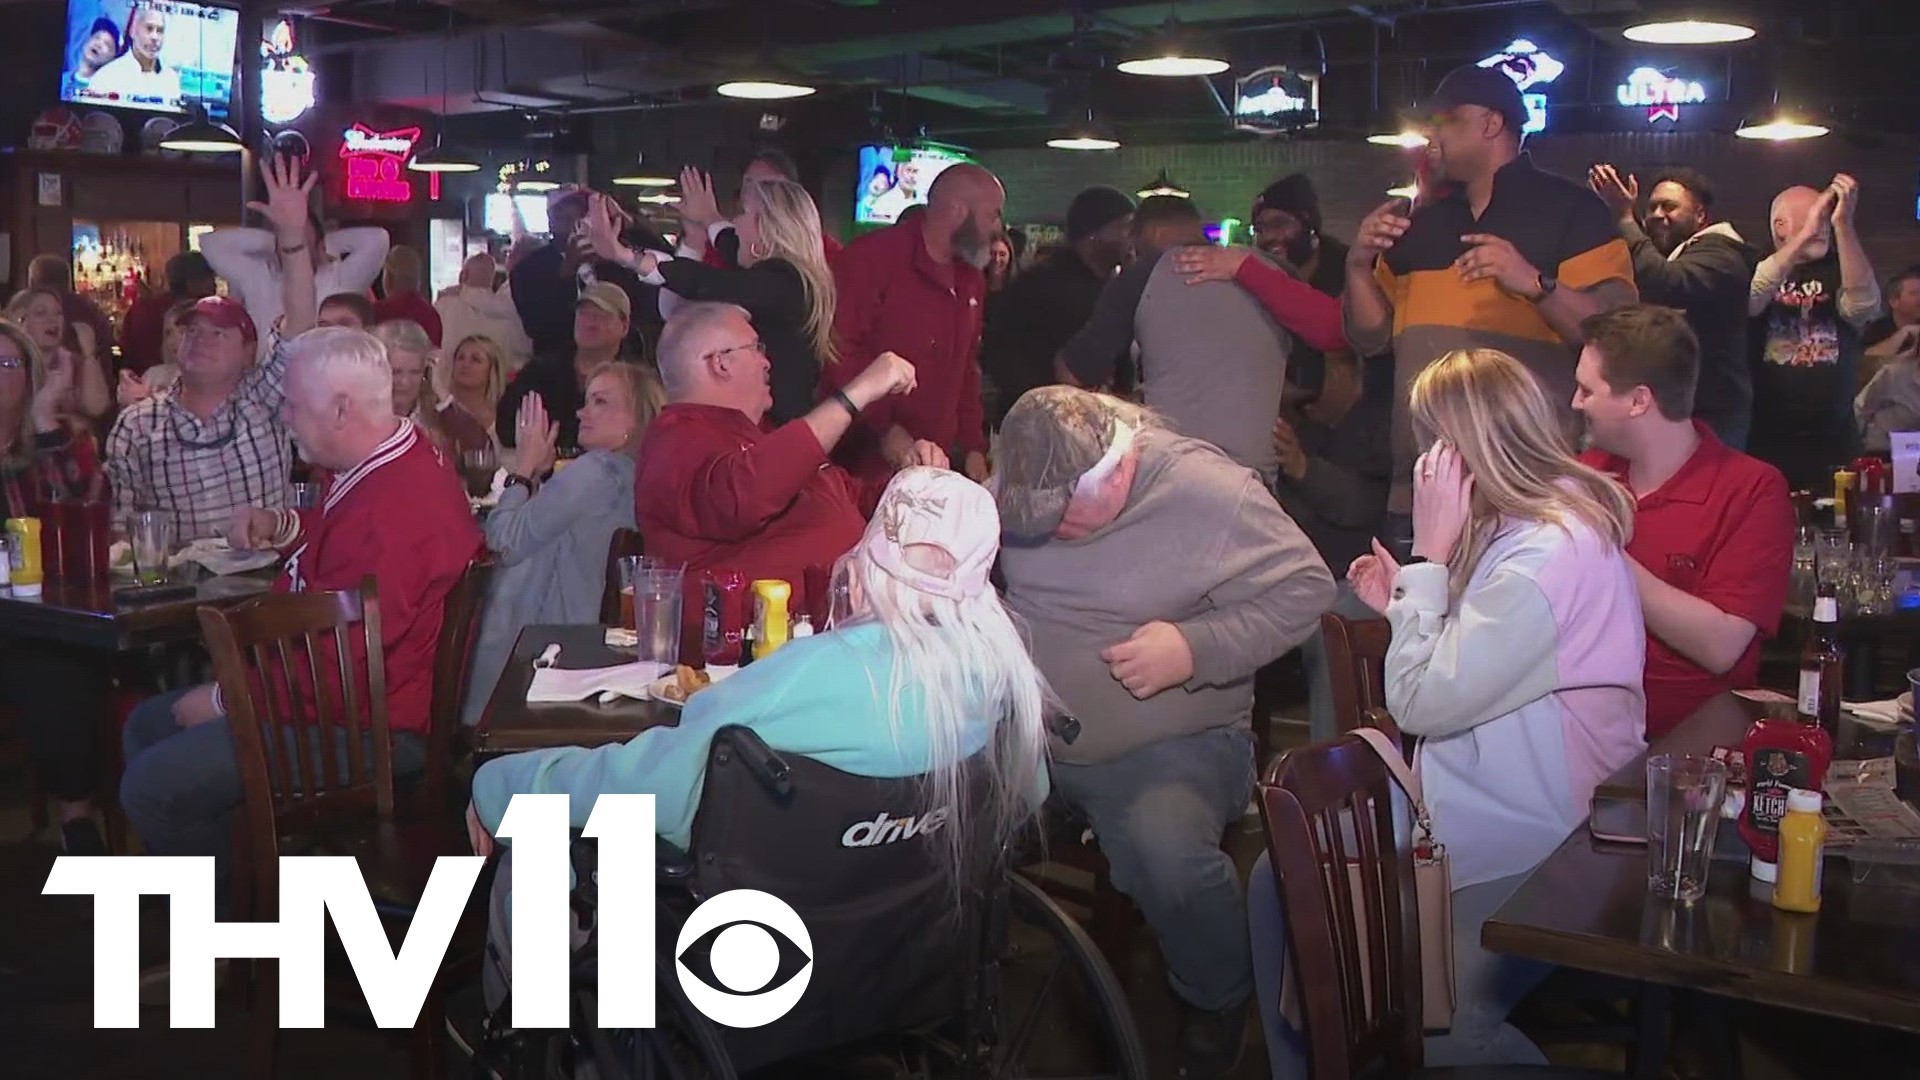 The Hogs secured their spot in the Sweet 16, and that means it's been a very busy weekend for many including restaurants and bars across Central Arkansas.